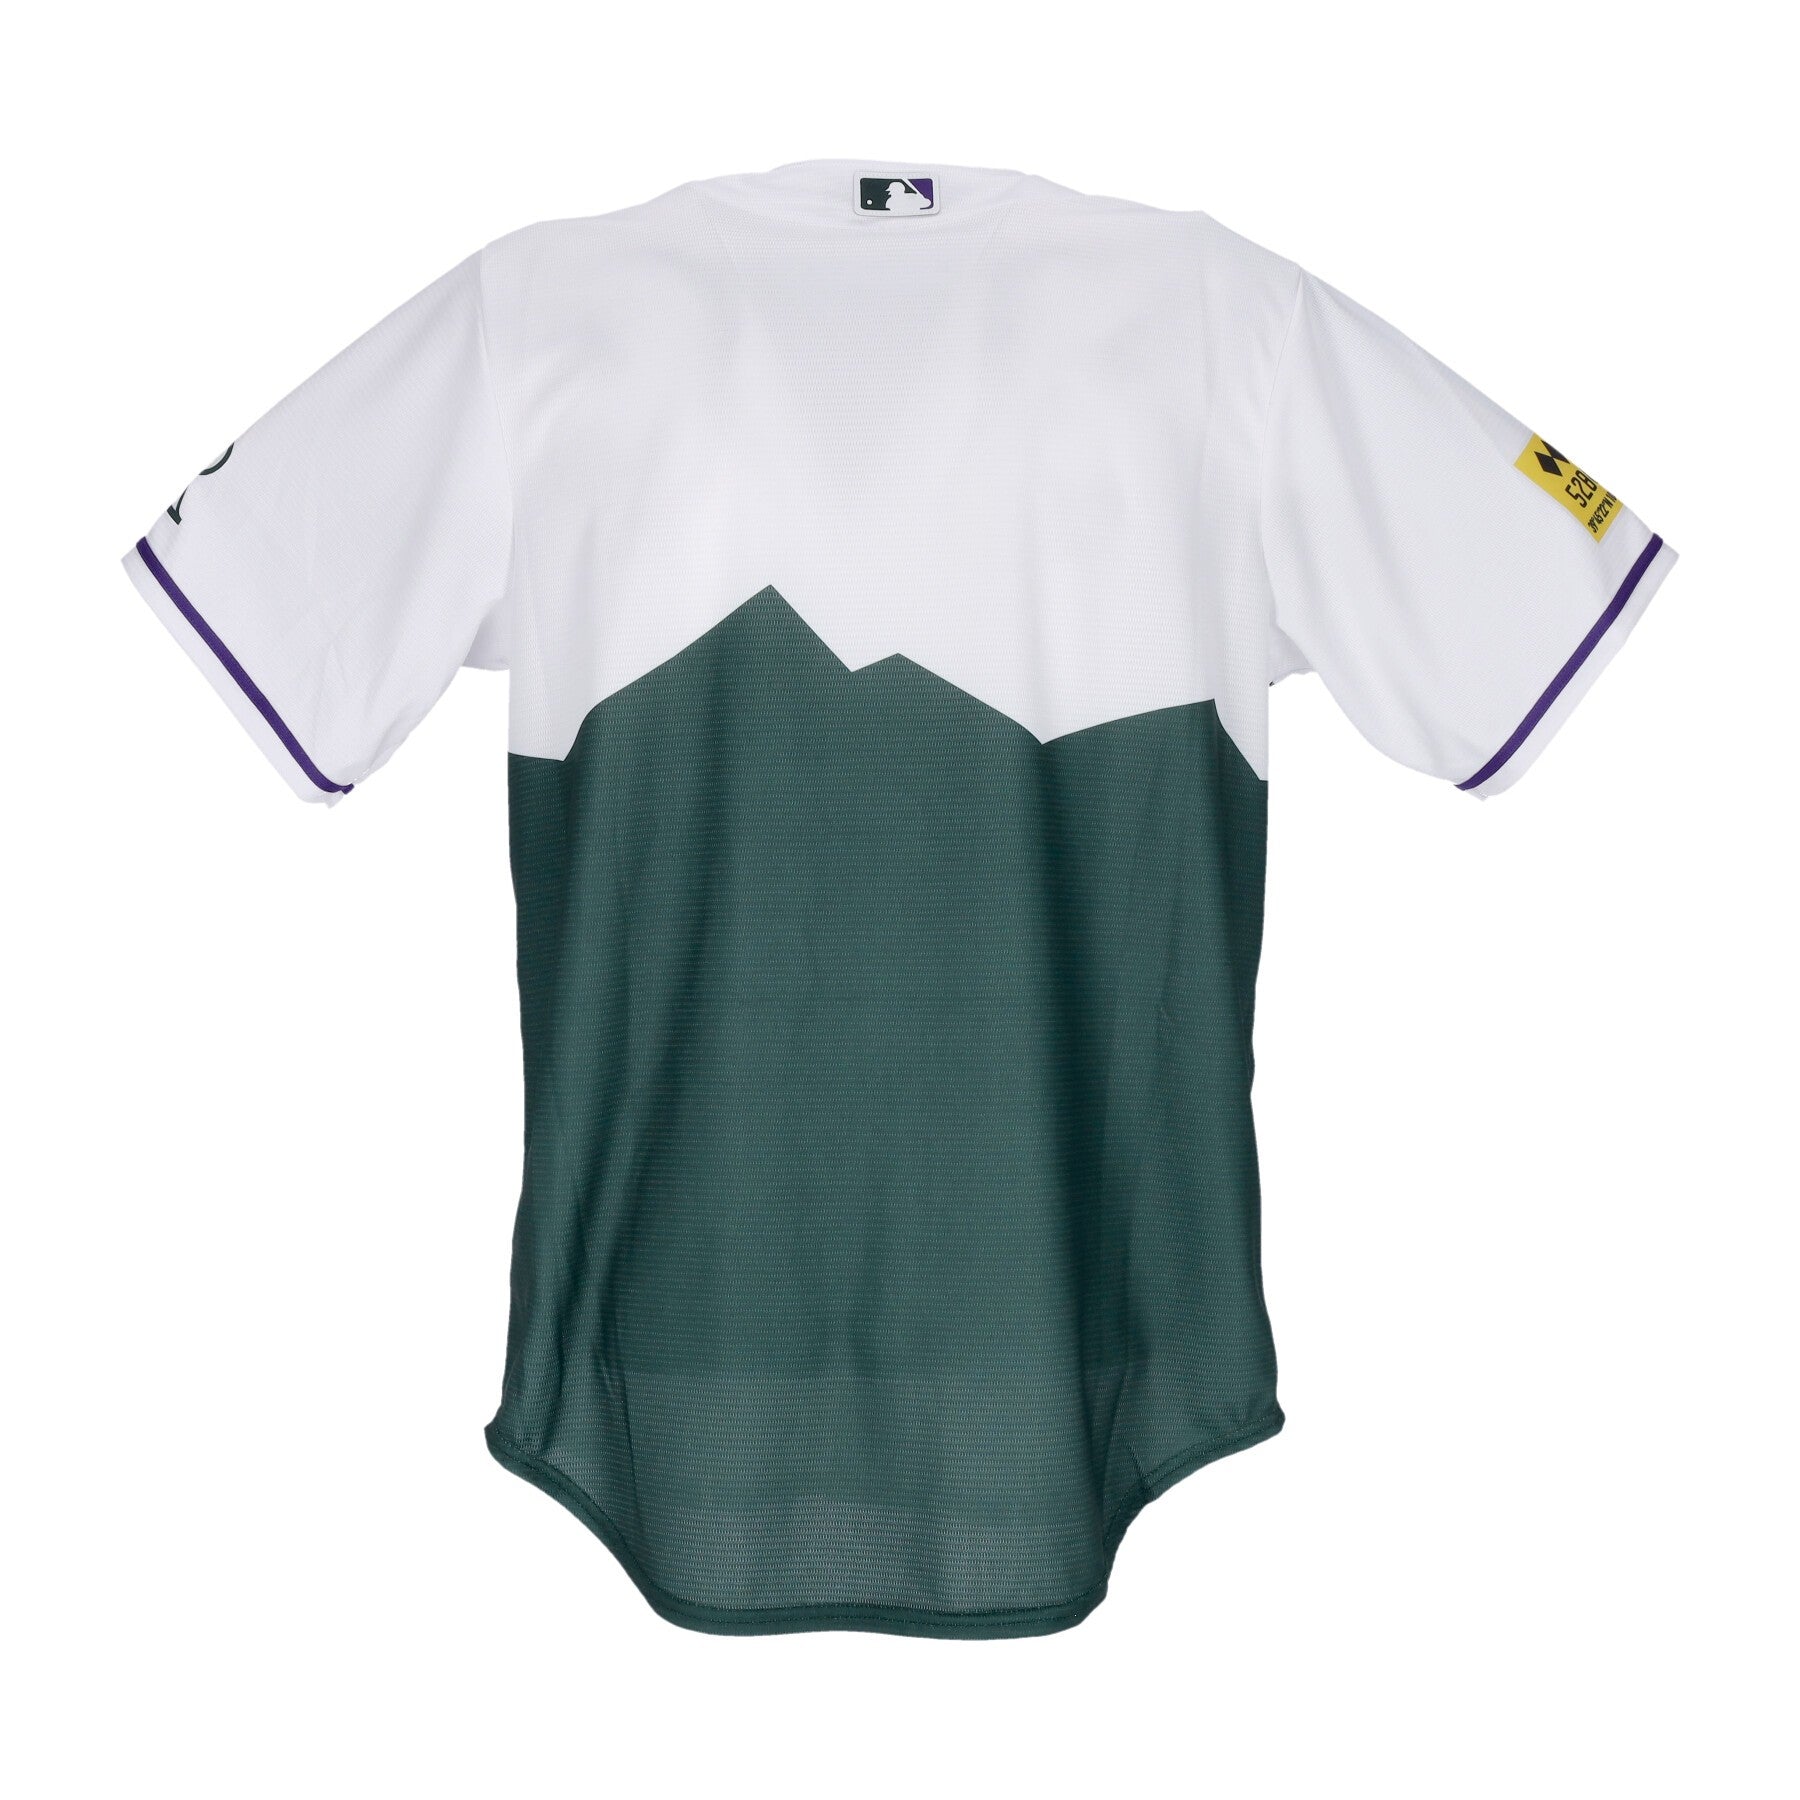 Nike Mlb, Casacca Baseball Uomo Mlb Official Replica Jersey City Connect Colroc, 